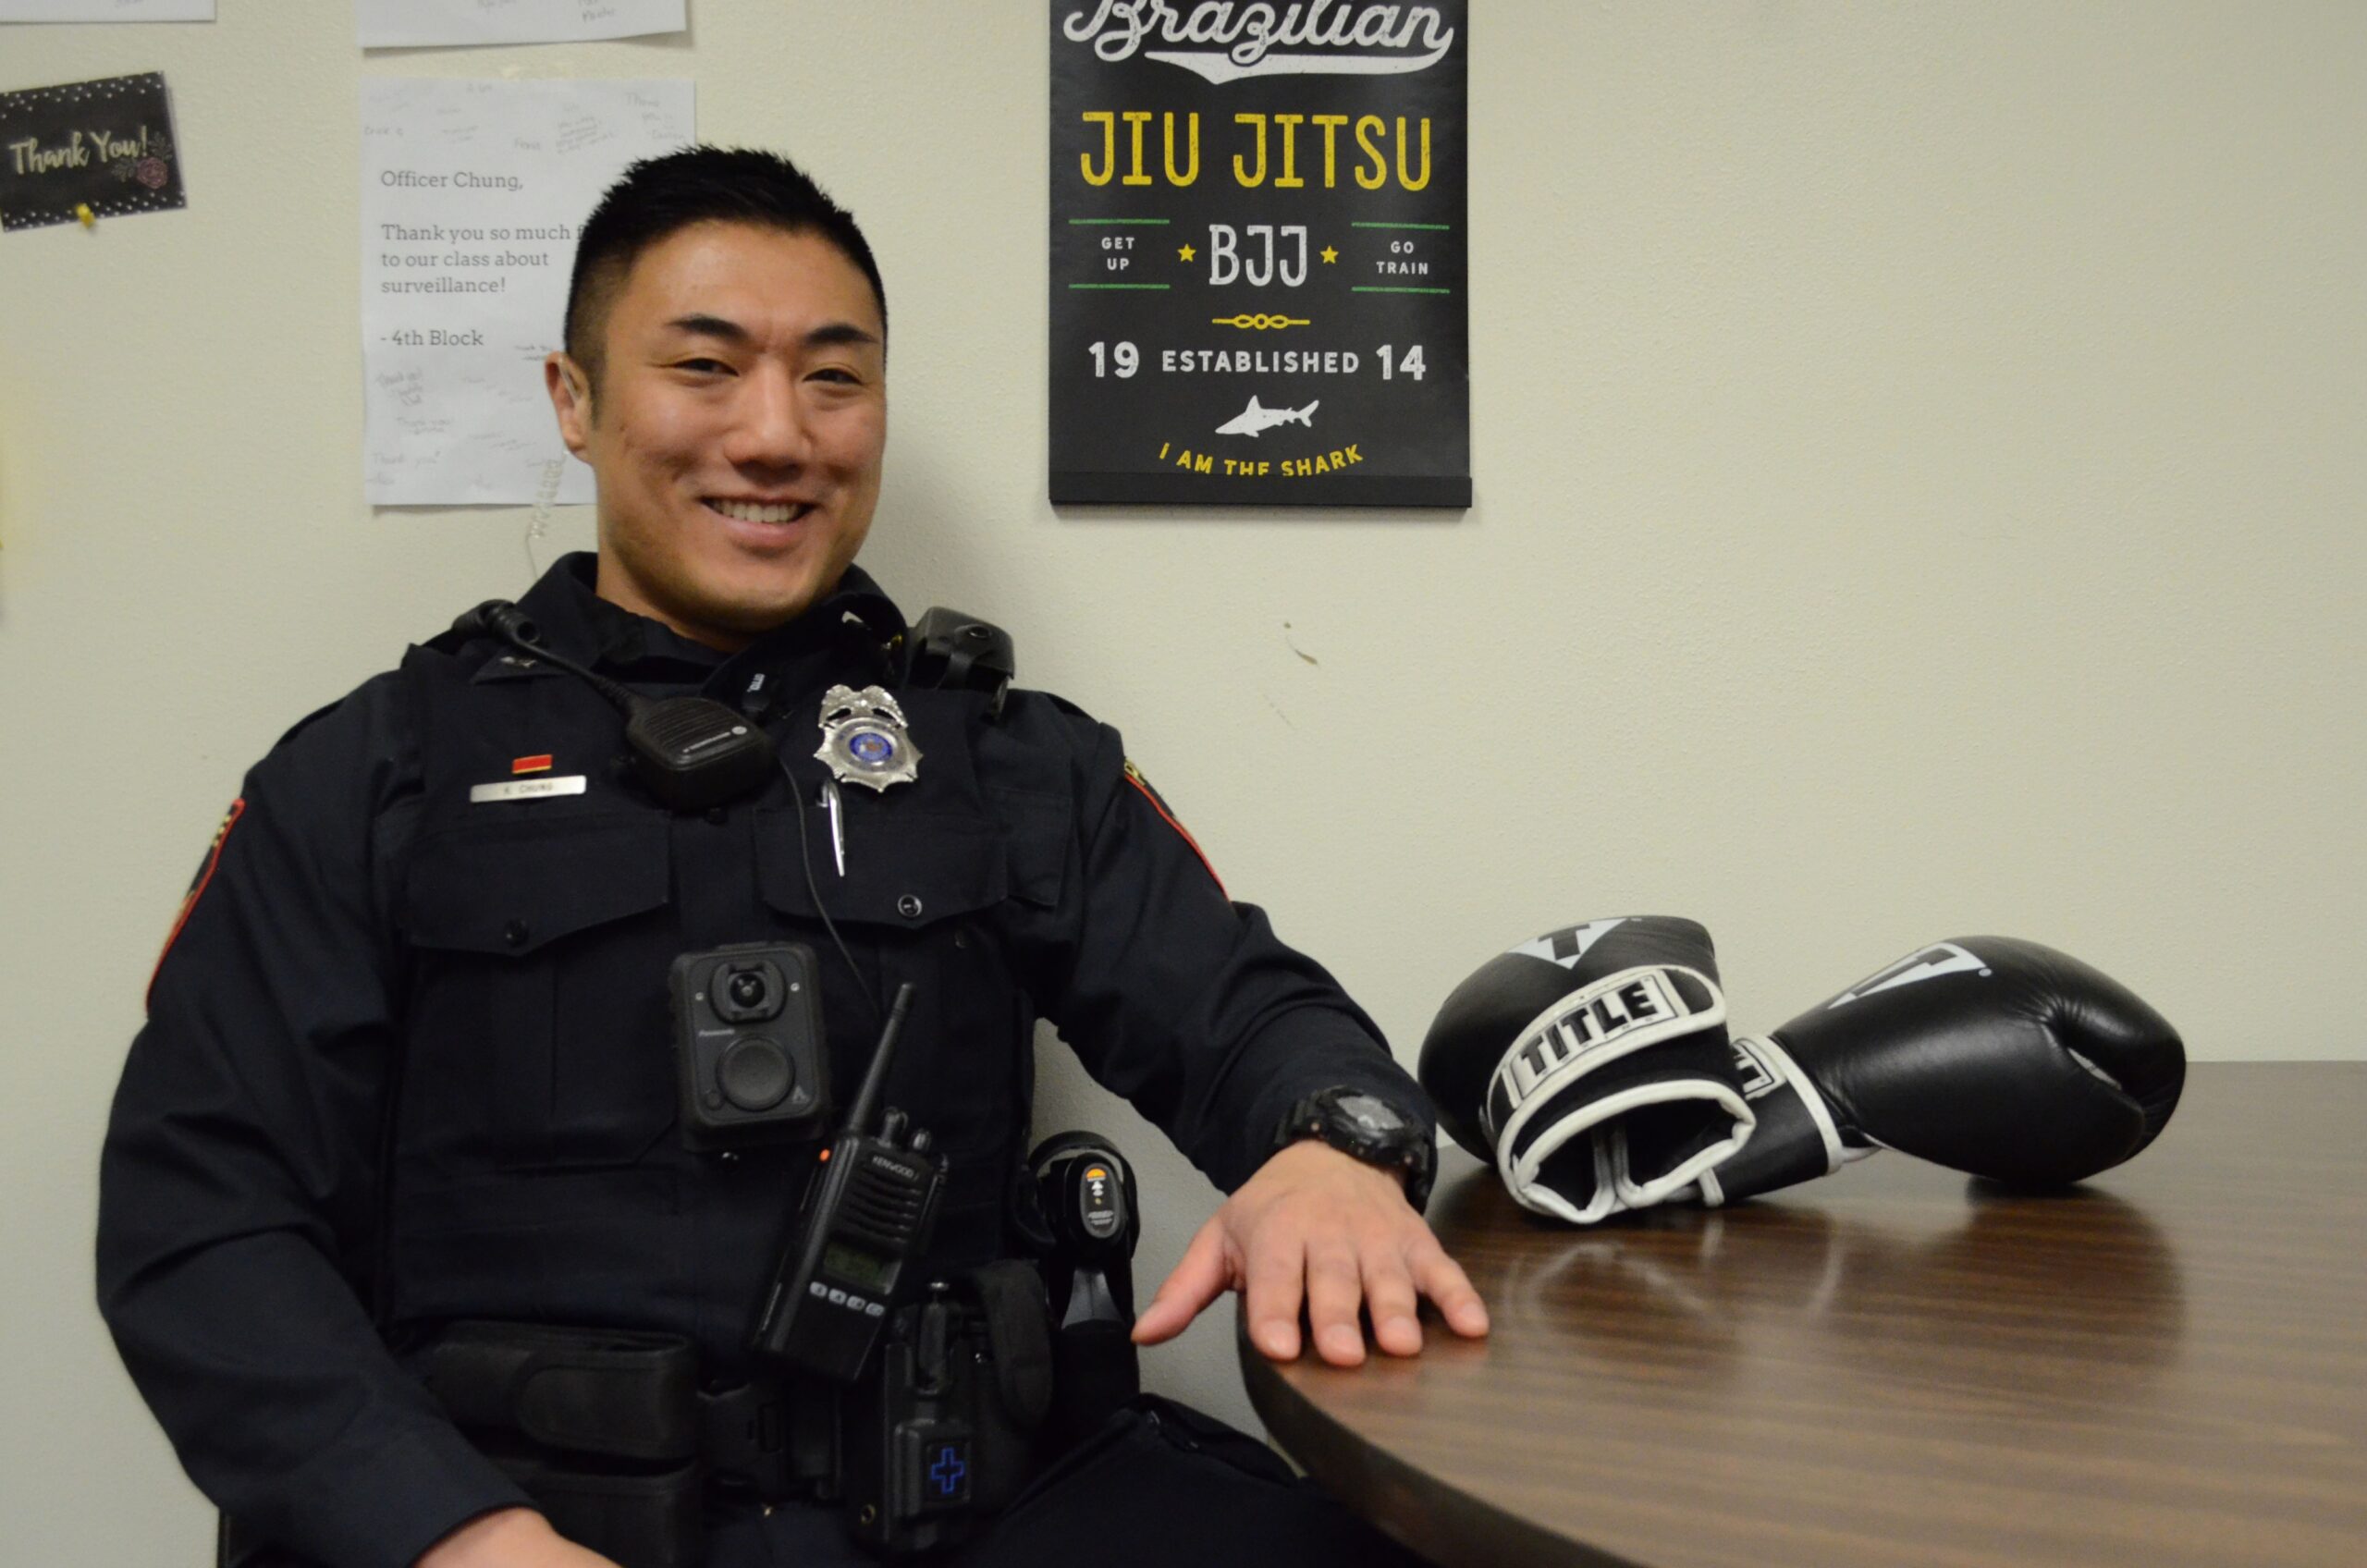 A man in full police uniform sits smiling at a table next to a pair of boxing gloves.